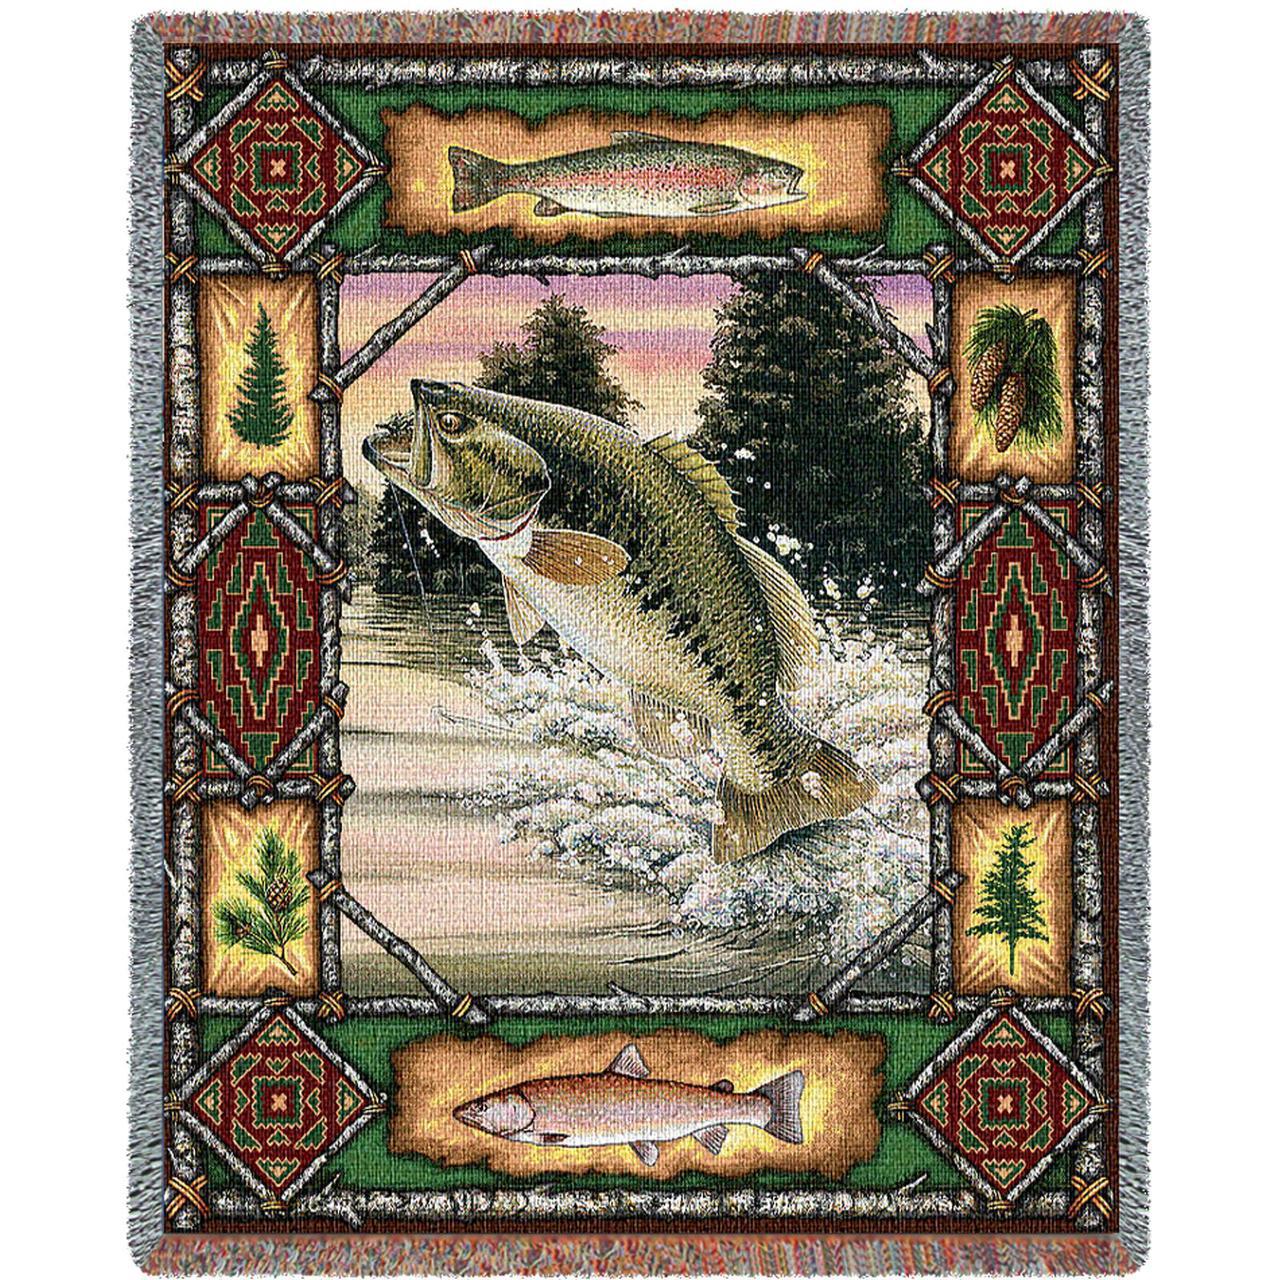 Tapestry Throw Blanket Wall Duck Fish Man Cave fishing more!